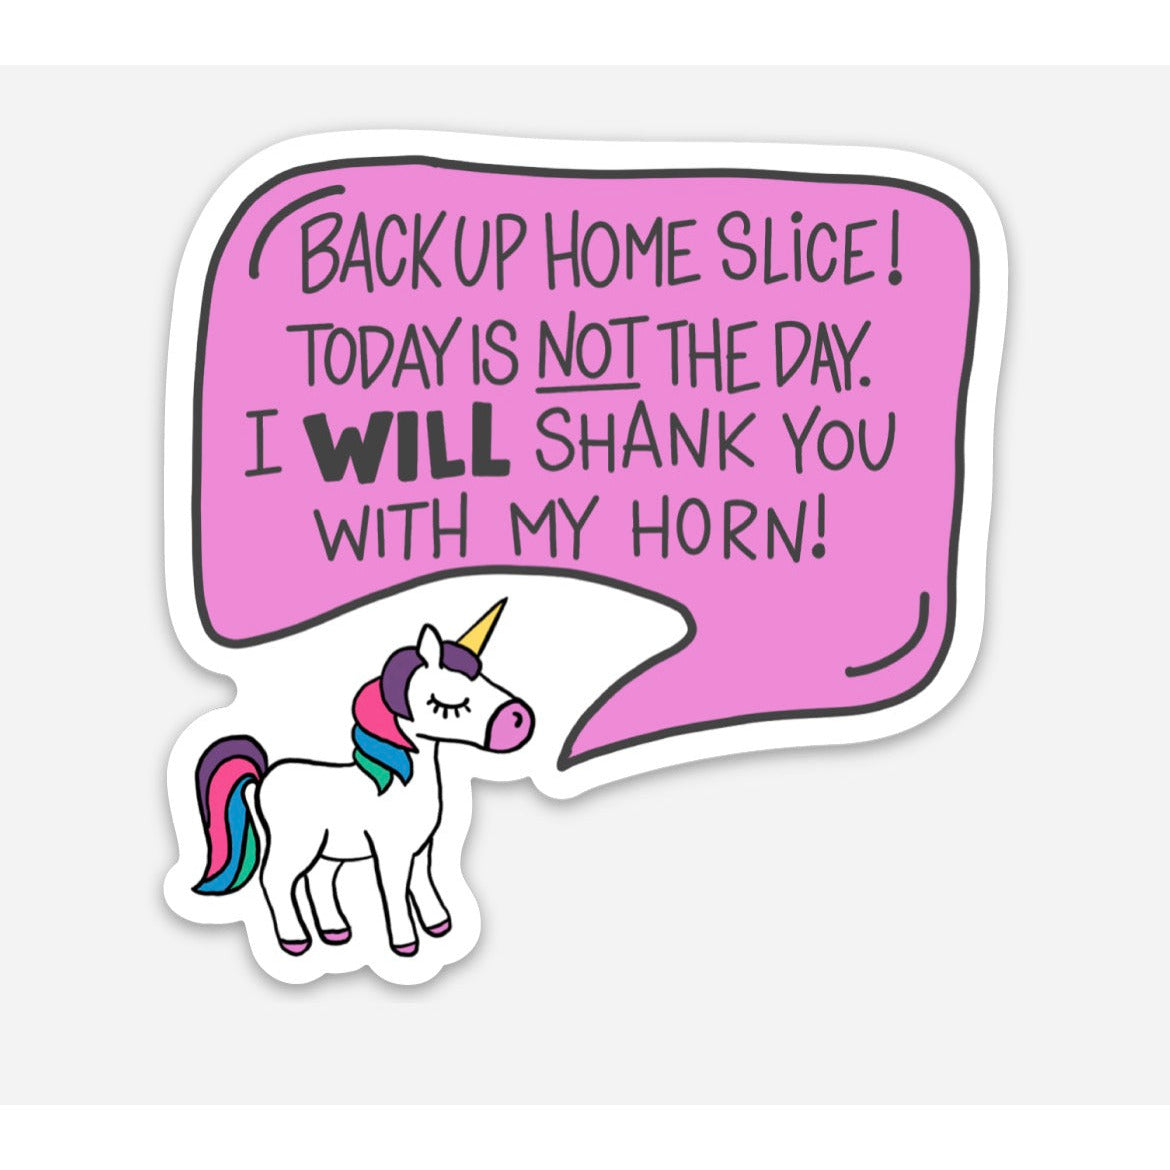 Today Is Not the Day (I will shank you with my horn) Unicorn Vinyl Sticker